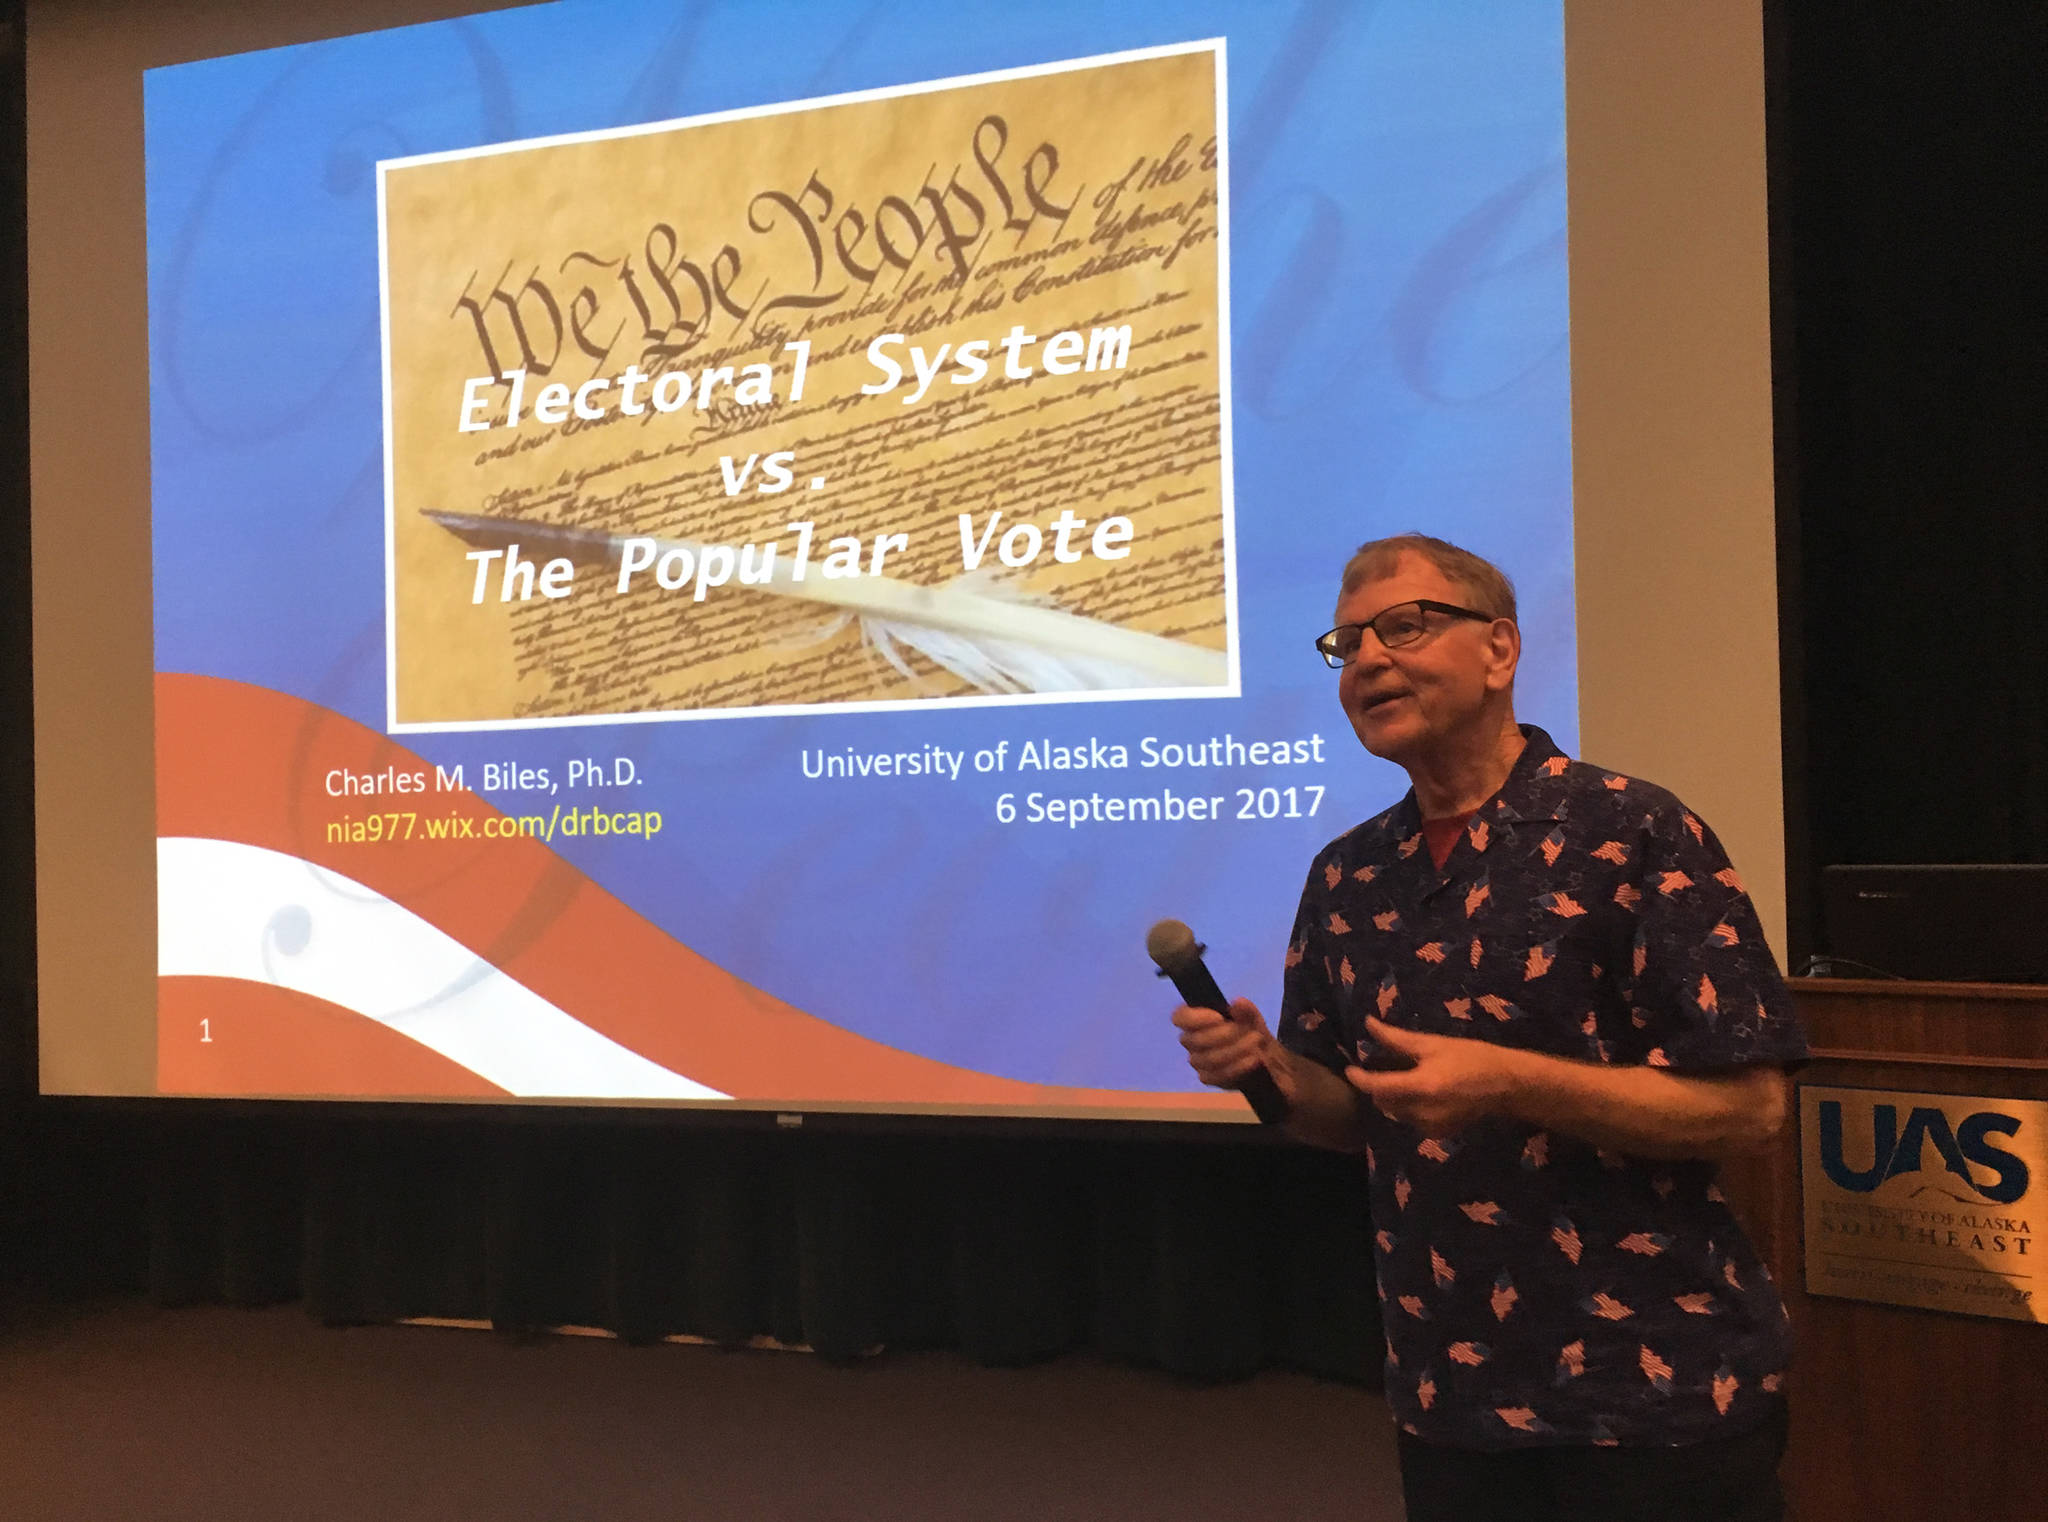 Charles Biles of Humboldt State University presents a lecture at the University of Alaska Southeast on Wednesday night, Sept. 7, 2017. (James Brooks | Juneau Empire)